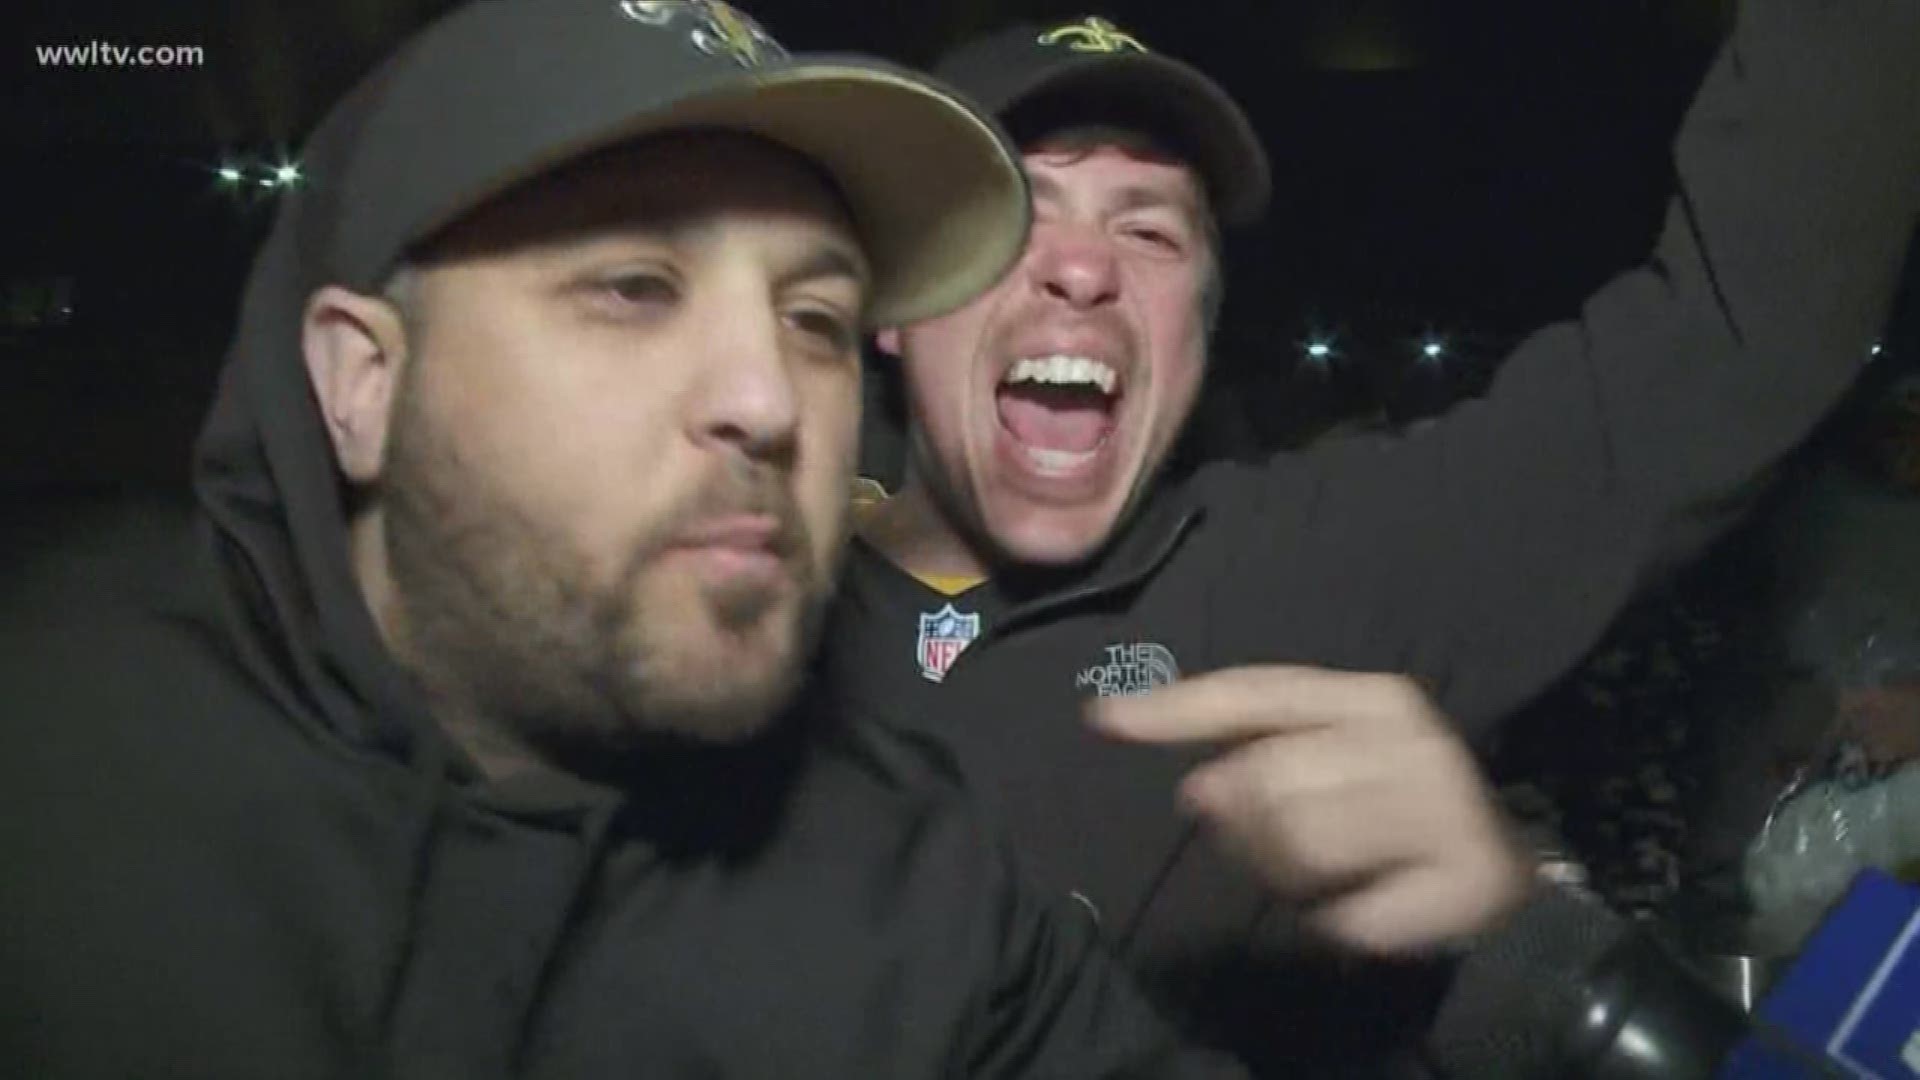 New Orleans Saints fans were celebrating the big divisional playoff win over the Philadelphia Eagles Sunday.